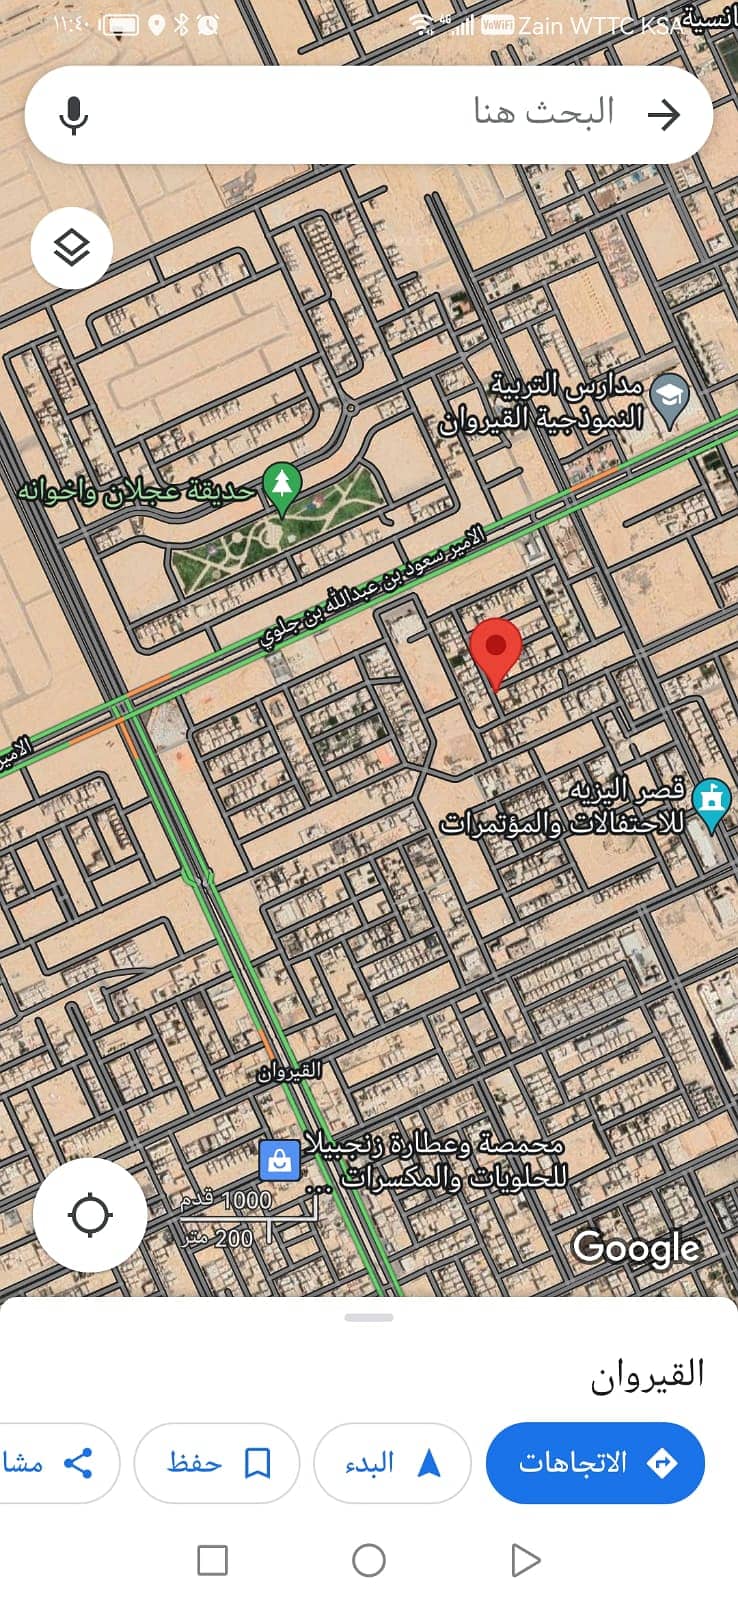 For sale a corner of residential land in the Al Qirawan district, north of Riyadh